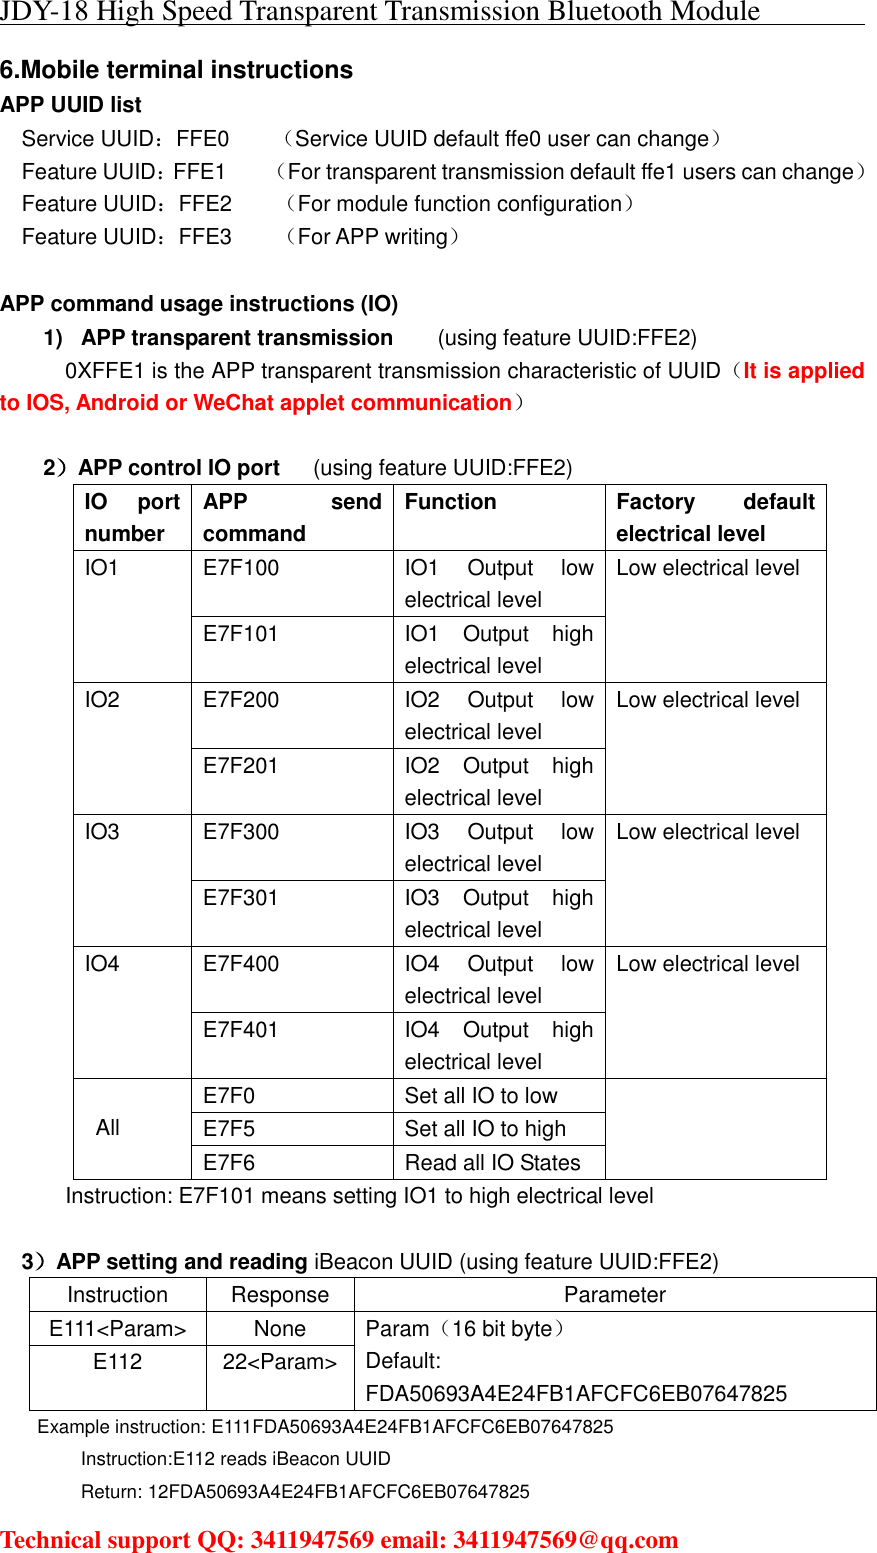 JDY-18 High Speed Transparent Transmission Bluetooth Module                                     Technical support QQ: 3411947569 email: 3411947569@qq.com   6.Mobile terminal instructions APP UUID list Service UUID：FFE0        （Service UUID default ffe0 user can change） Feature UUID：FFE1       （For transparent transmission default ffe1 users can change）Feature UUID：FFE2        （For module function configuration） Feature UUID：FFE3        （For APP writing）  APP command usage instructions (IO) 1)  APP transparent transmission    (using feature UUID:FFE2)   0XFFE1 is the APP transparent transmission characteristic of UUID（It is applied to IOS, Android or WeChat applet communication）  2）APP control IO port   (using feature UUID:FFE2) IO  port number APP send command Function Factory  default electrical level IO1  E7F100 IO1  Output  low electrical level Low electrical level E7F101 IO1  Output  high electrical level IO2  E7F200 IO2  Output  low electrical level Low electrical level E7F201 IO2  Output  high electrical level IO3  E7F300 IO3  Output  low electrical level Low electrical level E7F301 IO3  Output  high electrical level IO4  E7F400 IO4  Output  low electrical level Low electrical level E7F401 IO4  Output  high electrical level  All E7F0 Set all IO to low  E7F5 Set all IO to high E7F6 Read all IO States Instruction: E7F101 means setting IO1 to high electrical level  3）APP setting and reading iBeacon UUID (using feature UUID:FFE2) Instruction Response Parameter E111&lt;Param&gt; None Param（16 bit byte） Default: FDA50693A4E24FB1AFCFC6EB07647825 E112 22&lt;Param&gt; Example instruction: E111FDA50693A4E24FB1AFCFC6EB07647825 Instruction:E112 reads iBeacon UUID Return: 12FDA50693A4E24FB1AFCFC6EB07647825 